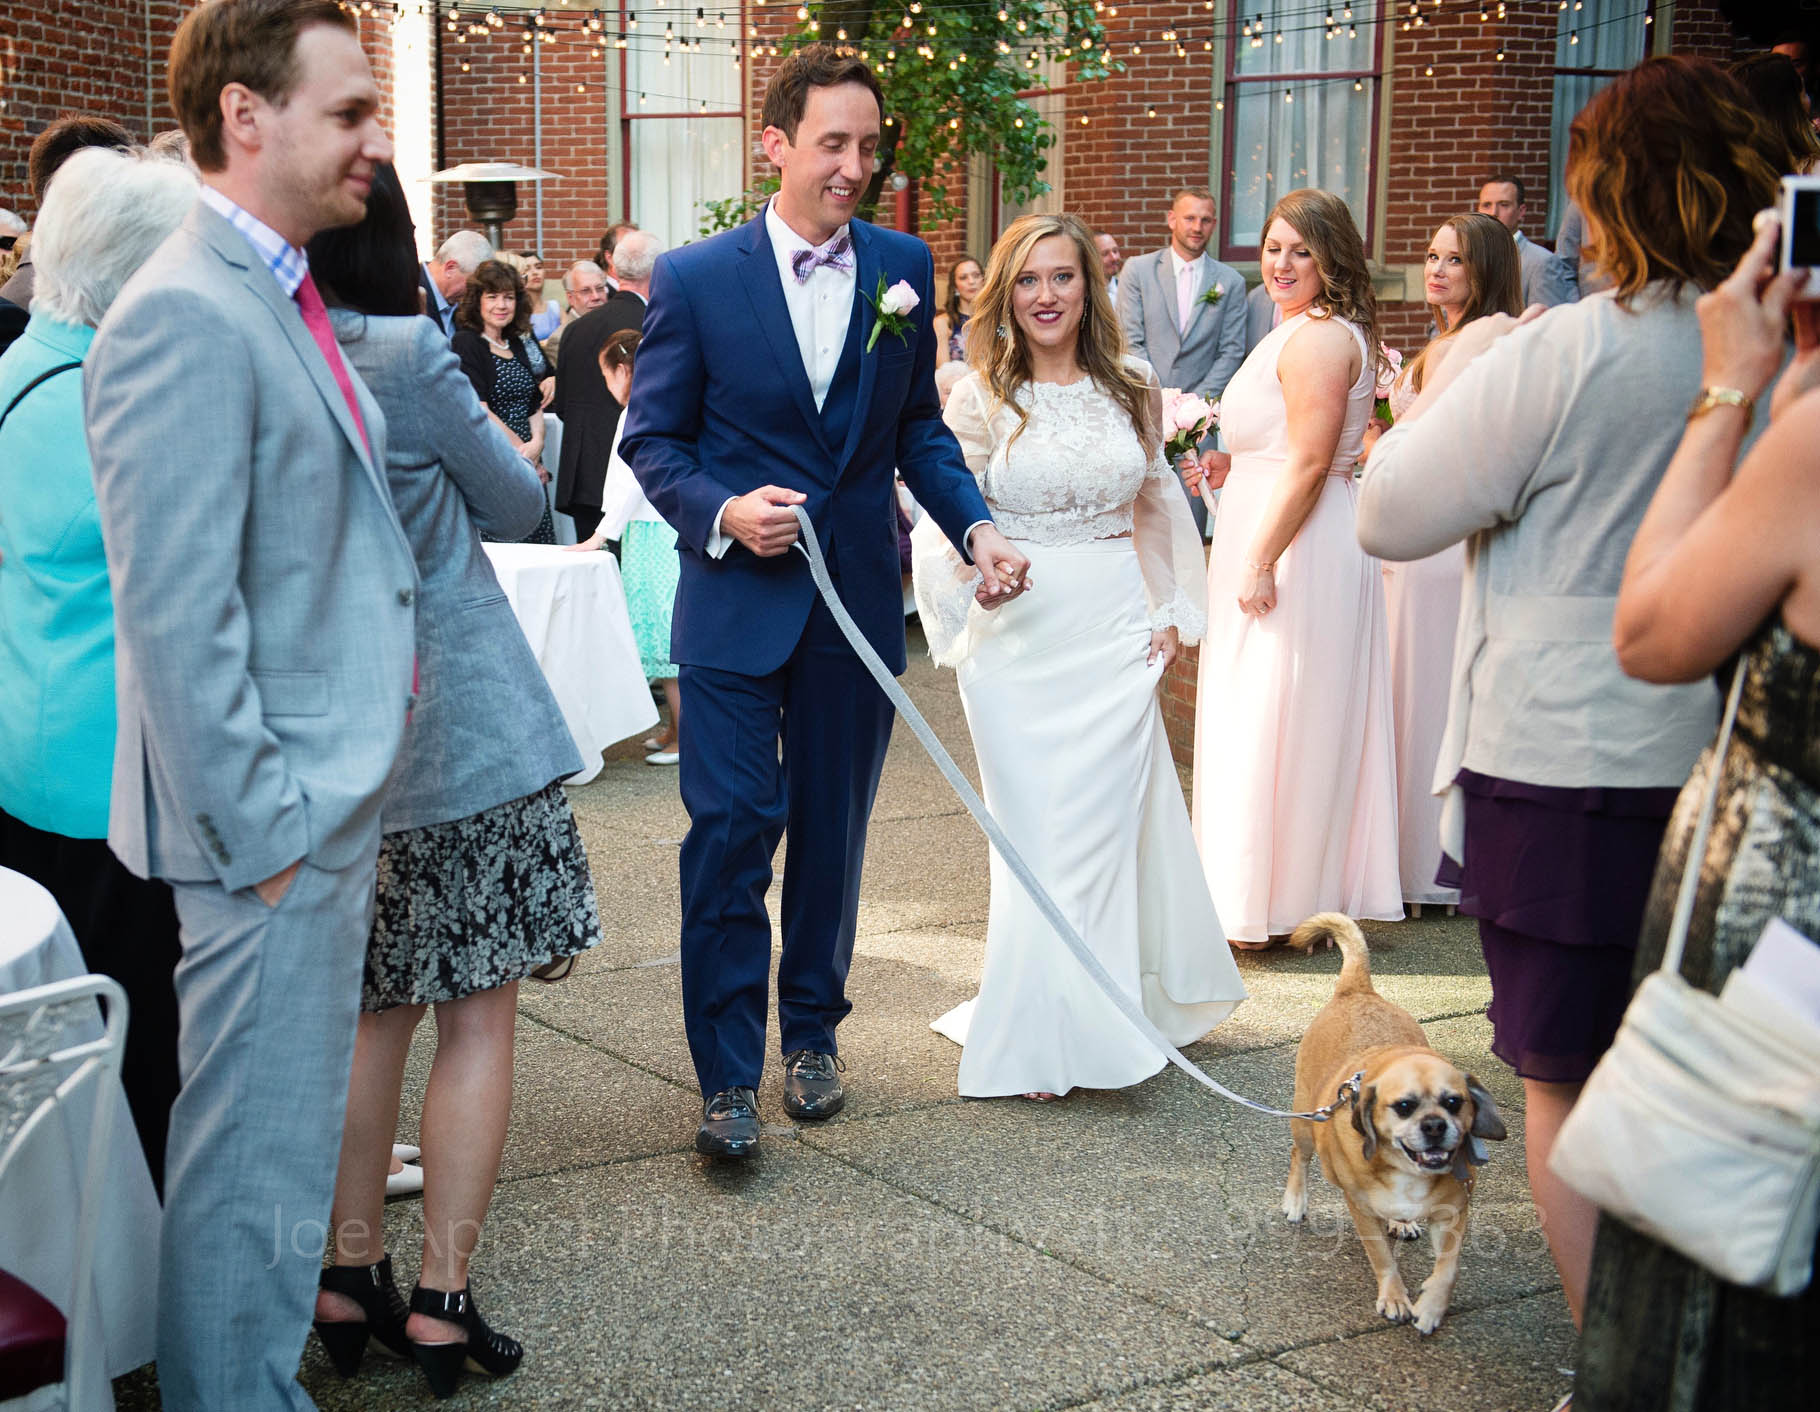 Bride and groom recess through the crowd gathered in a courtyard for their wedding while their dog leads them out on a leash.